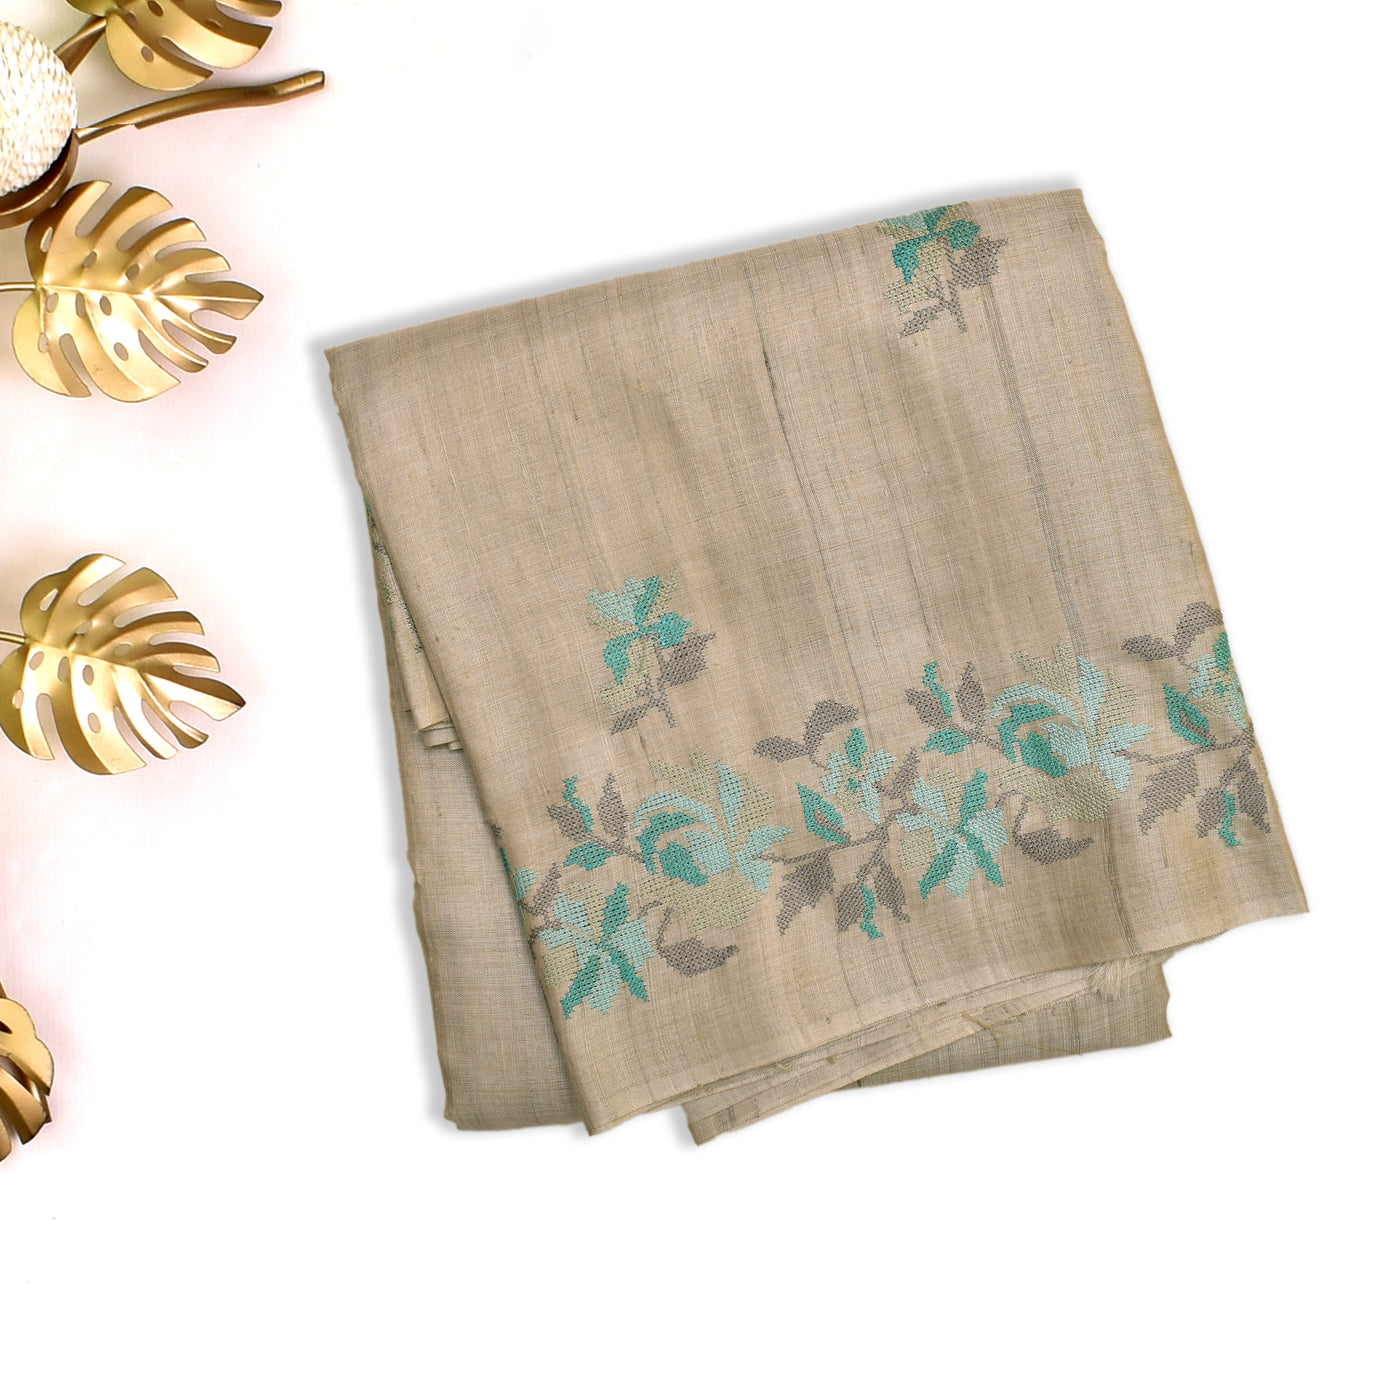 Off White Tussar Silk Saree with Embroidery Design